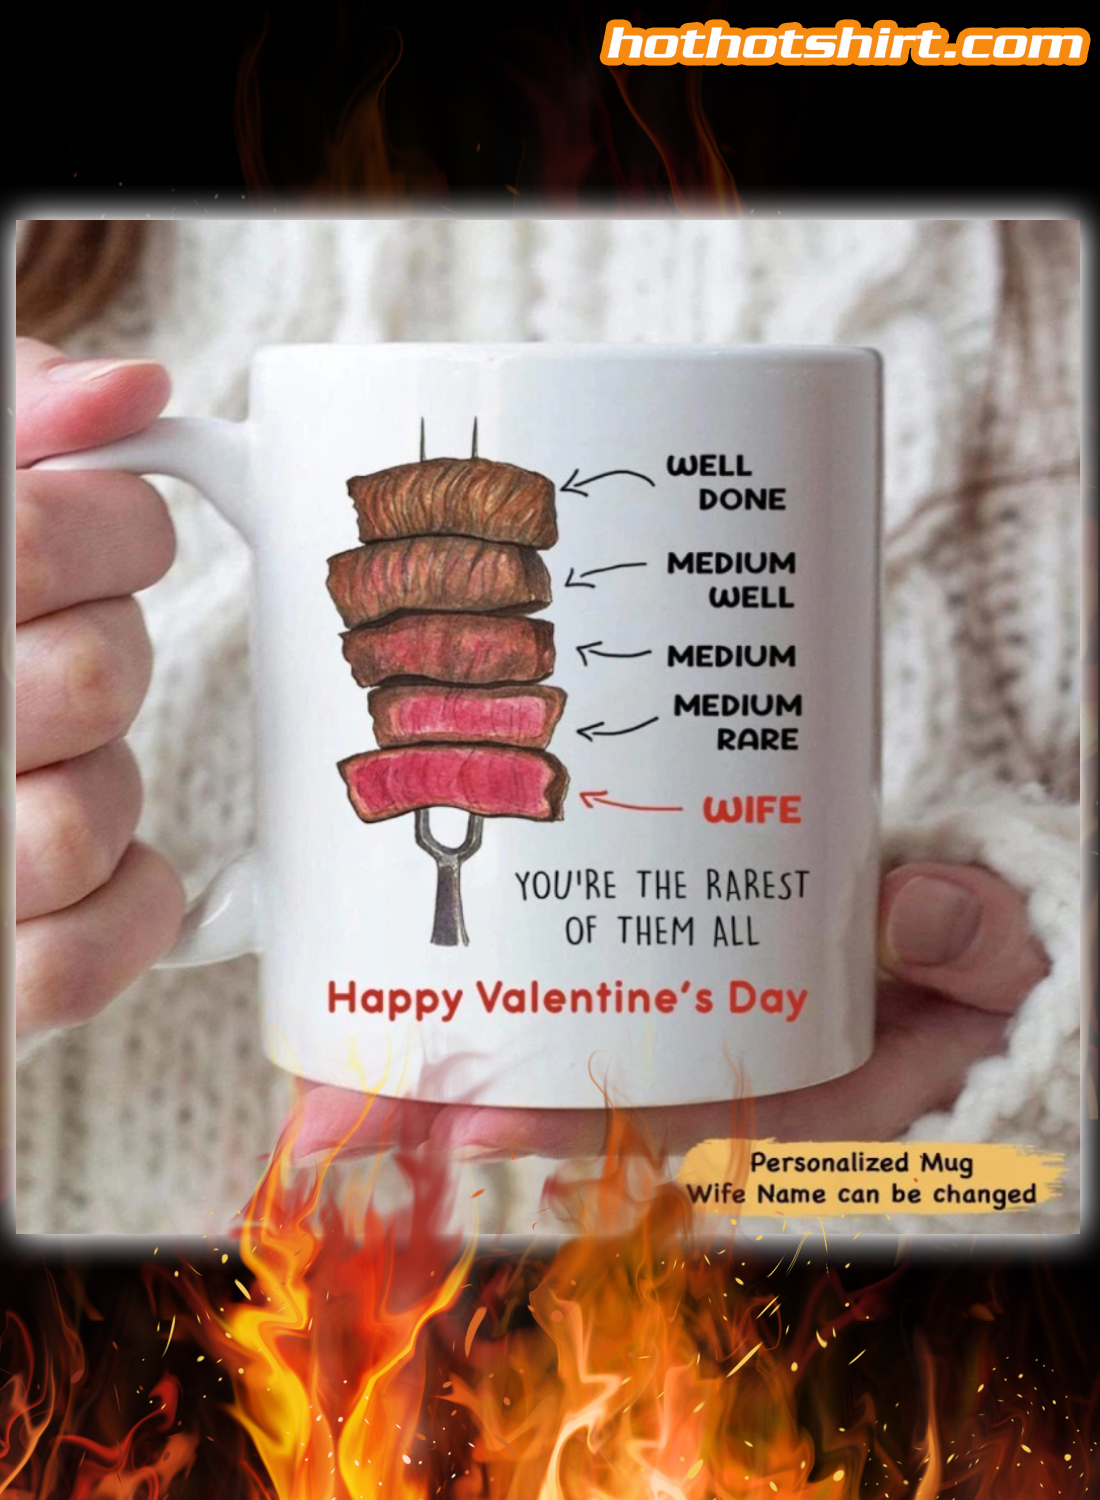 Personalized wife you're the rarest of them all happy valentine's day mug